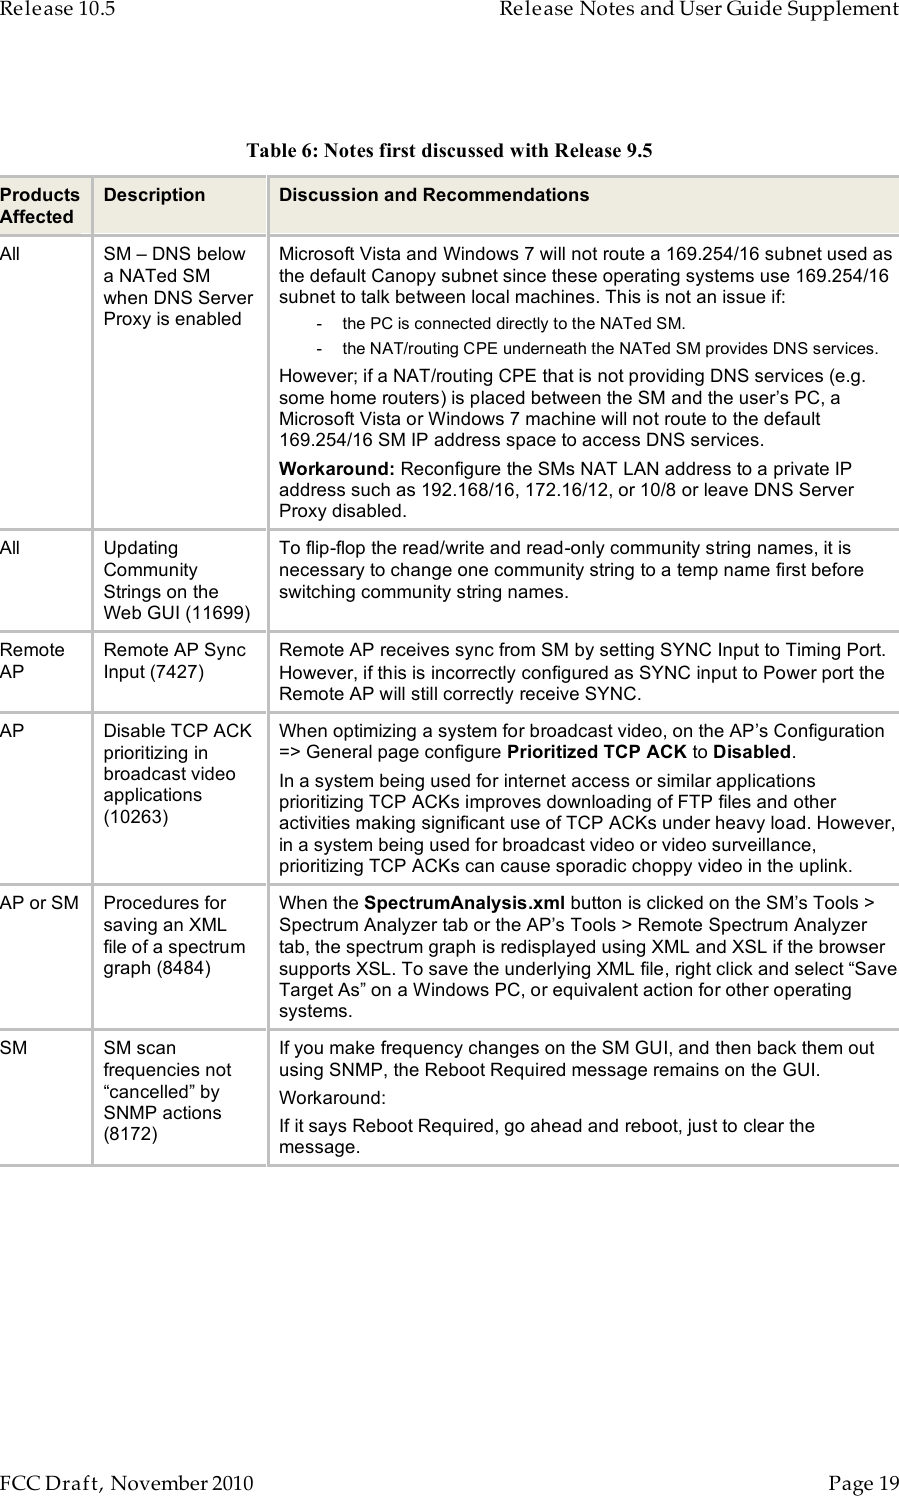 Release 10.5    Release Notes and User Guide Supplement      FCC Draft, November 2010  Page 19    Table 6: Notes first discussed with Release 9.5 Products Affected Description Discussion and Recommendations All SM – DNS below a NATed SM when DNS Server Proxy is enabled Microsoft Vista and Windows 7 will not route a 169.254/16 subnet used as the default Canopy subnet since these operating systems use 169.254/16 subnet to talk between local machines. This is not an issue if: -     the PC is connected directly to the NATed SM. -     the NAT/routing CPE underneath the NATed SM provides DNS services. However; if a NAT/routing CPE that is not providing DNS services (e.g. some home routers) is placed between the SM and the user’s PC, a Microsoft Vista or Windows 7 machine will not route to the default 169.254/16 SM IP address space to access DNS services. Workaround: Reconfigure the SMs NAT LAN address to a private IP address such as 192.168/16, 172.16/12, or 10/8 or leave DNS Server Proxy disabled. All Updating Community Strings on the Web GUI (11699) To flip-flop the read/write and read-only community string names, it is necessary to change one community string to a temp name first before switching community string names. Remote AP Remote AP Sync Input (7427) Remote AP receives sync from SM by setting SYNC Input to Timing Port. However, if this is incorrectly configured as SYNC input to Power port the Remote AP will still correctly receive SYNC. AP Disable TCP ACK prioritizing in broadcast video applications (10263) When optimizing a system for broadcast video, on the AP’s Configuration =&gt; General page configure Prioritized TCP ACK to Disabled. In a system being used for internet access or similar applications prioritizing TCP ACKs improves downloading of FTP files and other activities making significant use of TCP ACKs under heavy load. However, in a system being used for broadcast video or video surveillance, prioritizing TCP ACKs can cause sporadic choppy video in the uplink. AP or SM Procedures for saving an XML file of a spectrum graph (8484) When the SpectrumAnalysis.xml button is clicked on the SM’s Tools &gt; Spectrum Analyzer tab or the AP’s Tools &gt; Remote Spectrum Analyzer tab, the spectrum graph is redisplayed using XML and XSL if the browser supports XSL. To save the underlying XML file, right click and select “Save Target As” on a Windows PC, or equivalent action for other operating systems. SM SM scan frequencies not “cancelled” by SNMP actions (8172) If you make frequency changes on the SM GUI, and then back them out using SNMP, the Reboot Required message remains on the GUI. Workaround:  If it says Reboot Required, go ahead and reboot, just to clear the message. 